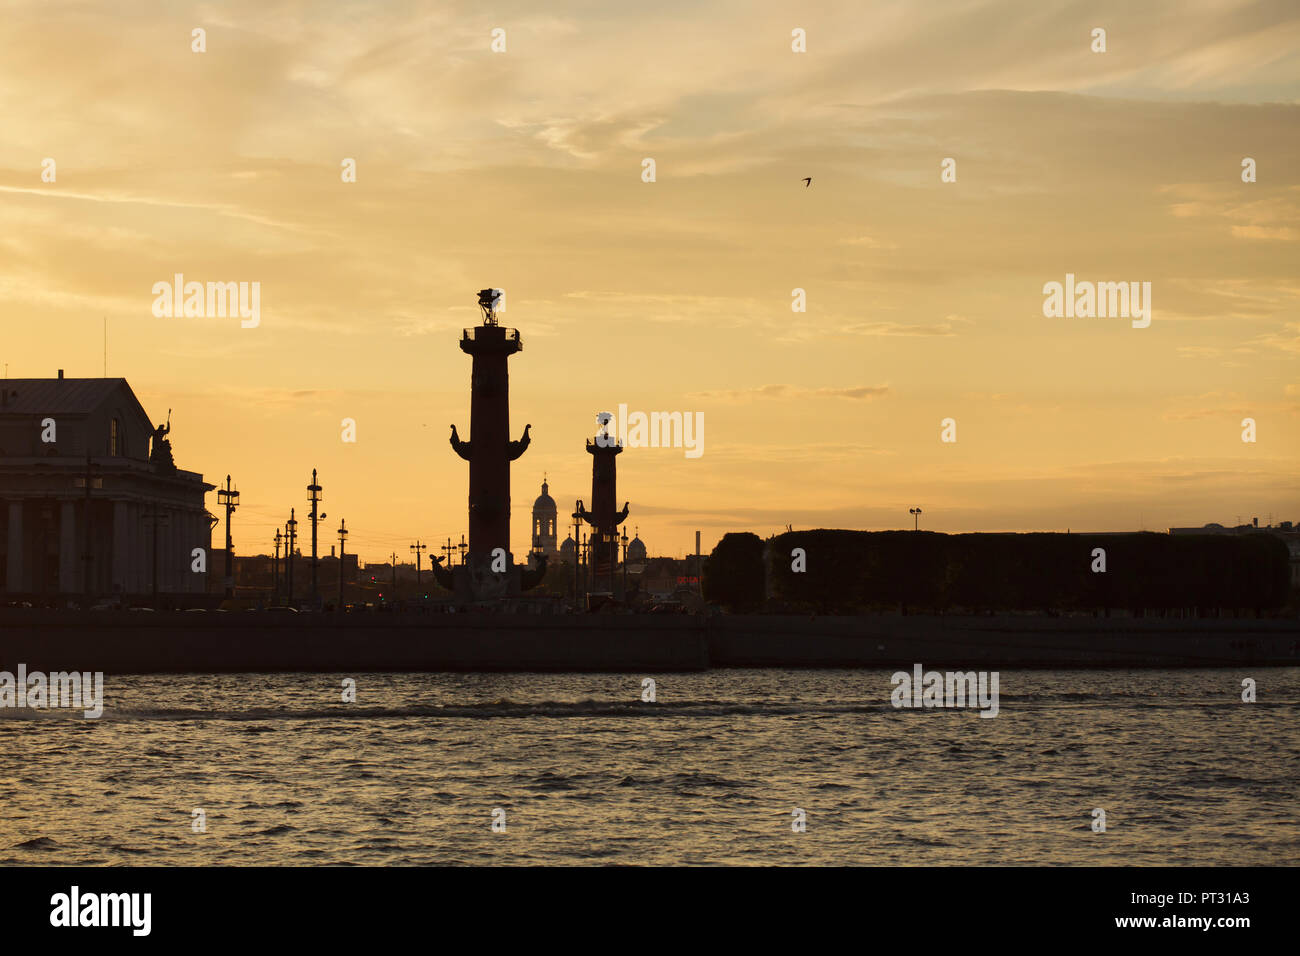 Rostral Columns designed by French neoclassical architect Jean-François Thomas de Thomon on the spit of Vasilievsky Island in Saint Petersburg, Russia, pictured at sunset. Saint Prince Vladimir's Cathedral in Petrogradsky District is seen in the background. Stock Photo